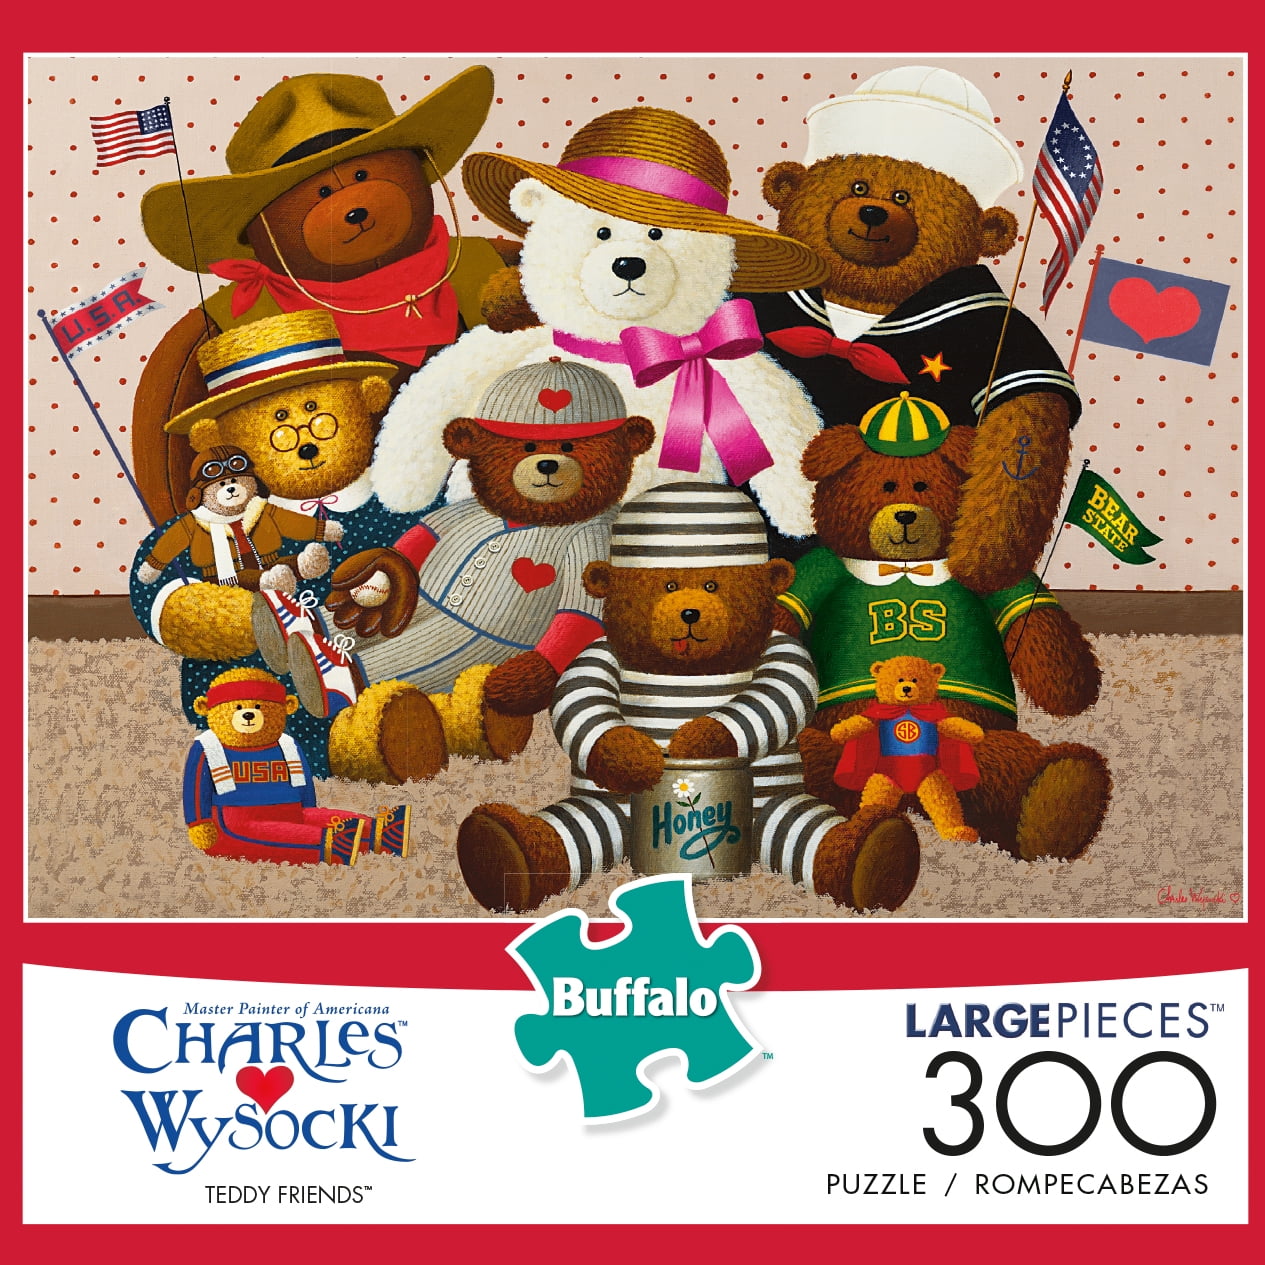 Charles Wysocki Jingle Bell Teddy & Friends Buffalo Games Puzzle 300pc for sale online 